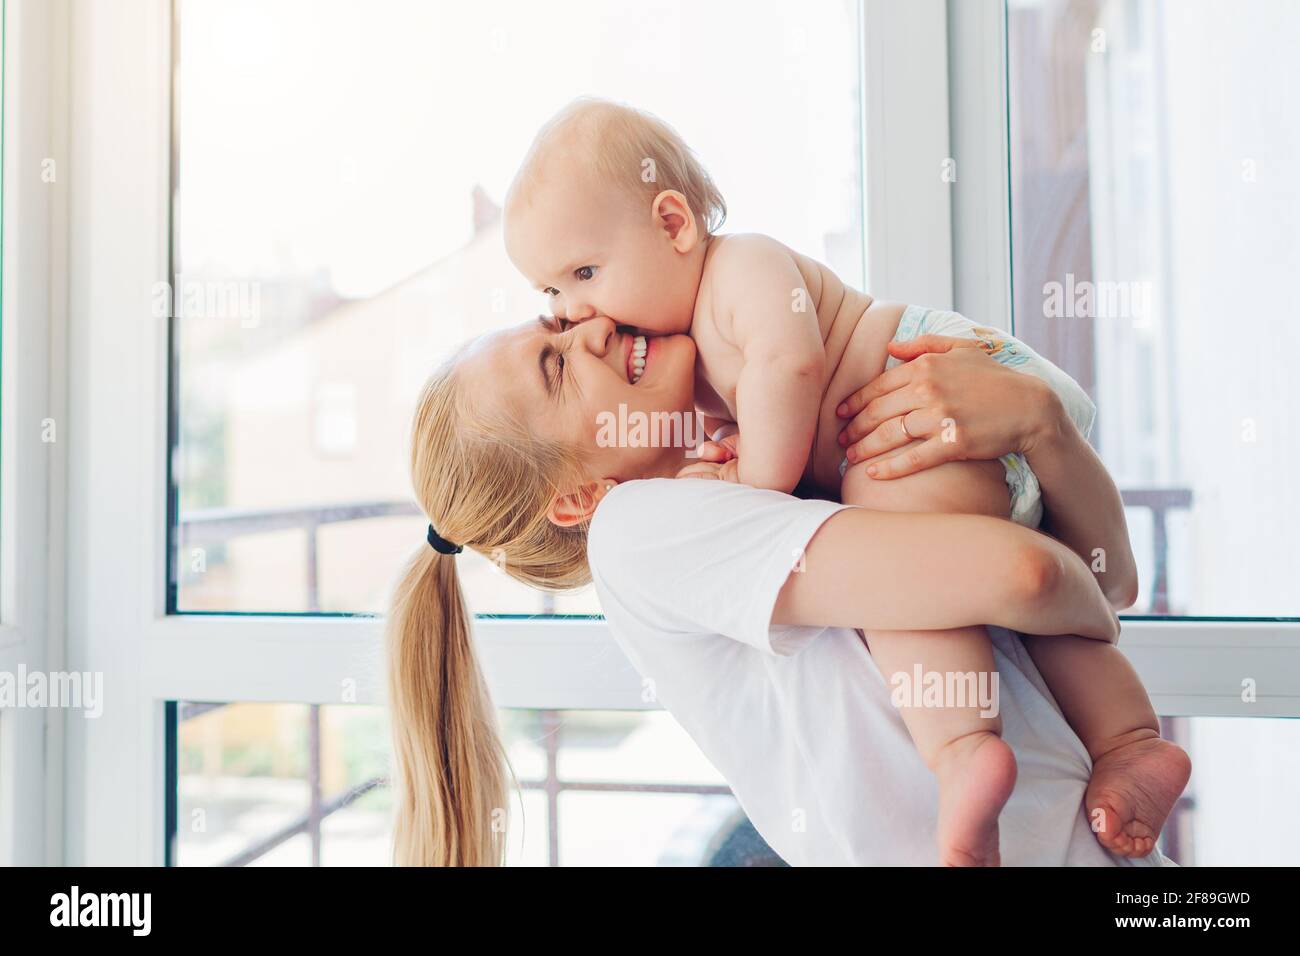 Mother's day. Young mother holding and hugging newborn baby son at home. Family relaxing on balcony. Infant wearing diaper. Stock Photo